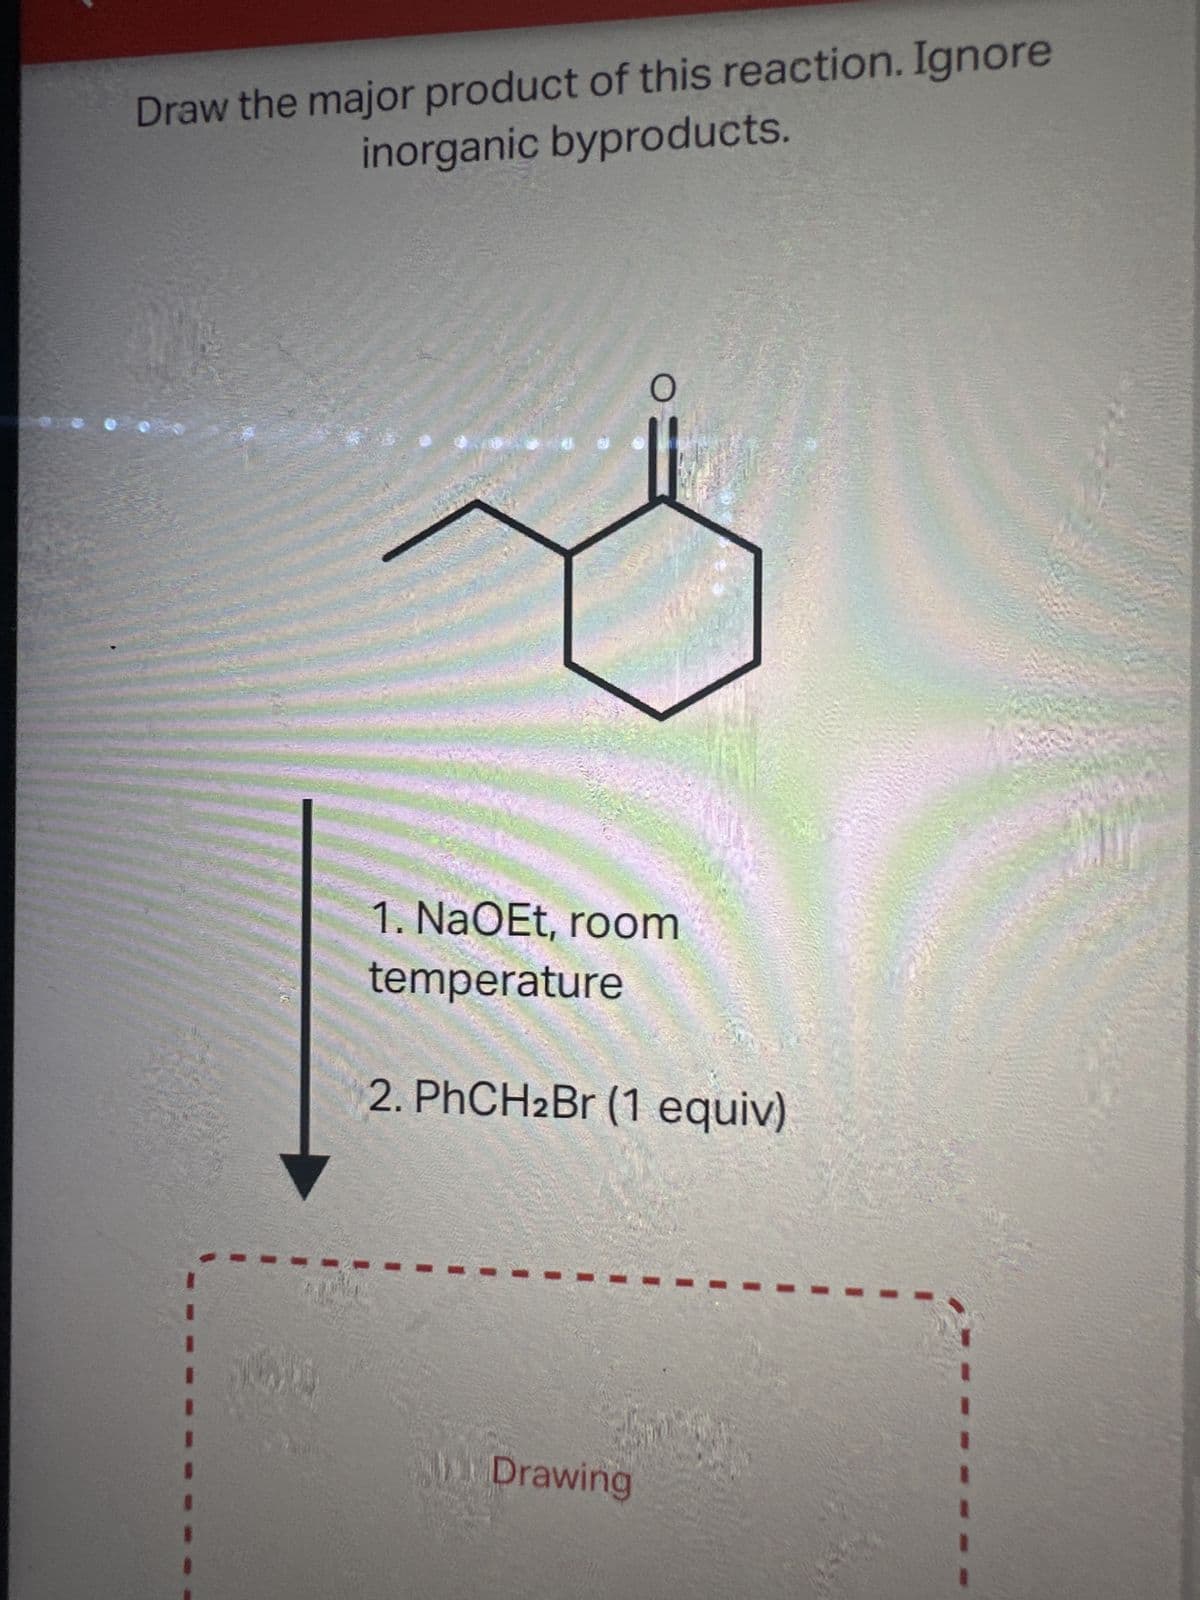 Draw the major product of this reaction. Ignore
inorganic byproducts.
Breederiks
1. NaOEt, room
temperature
2. PhCH2Br (1 equiv)
Drawing
Car